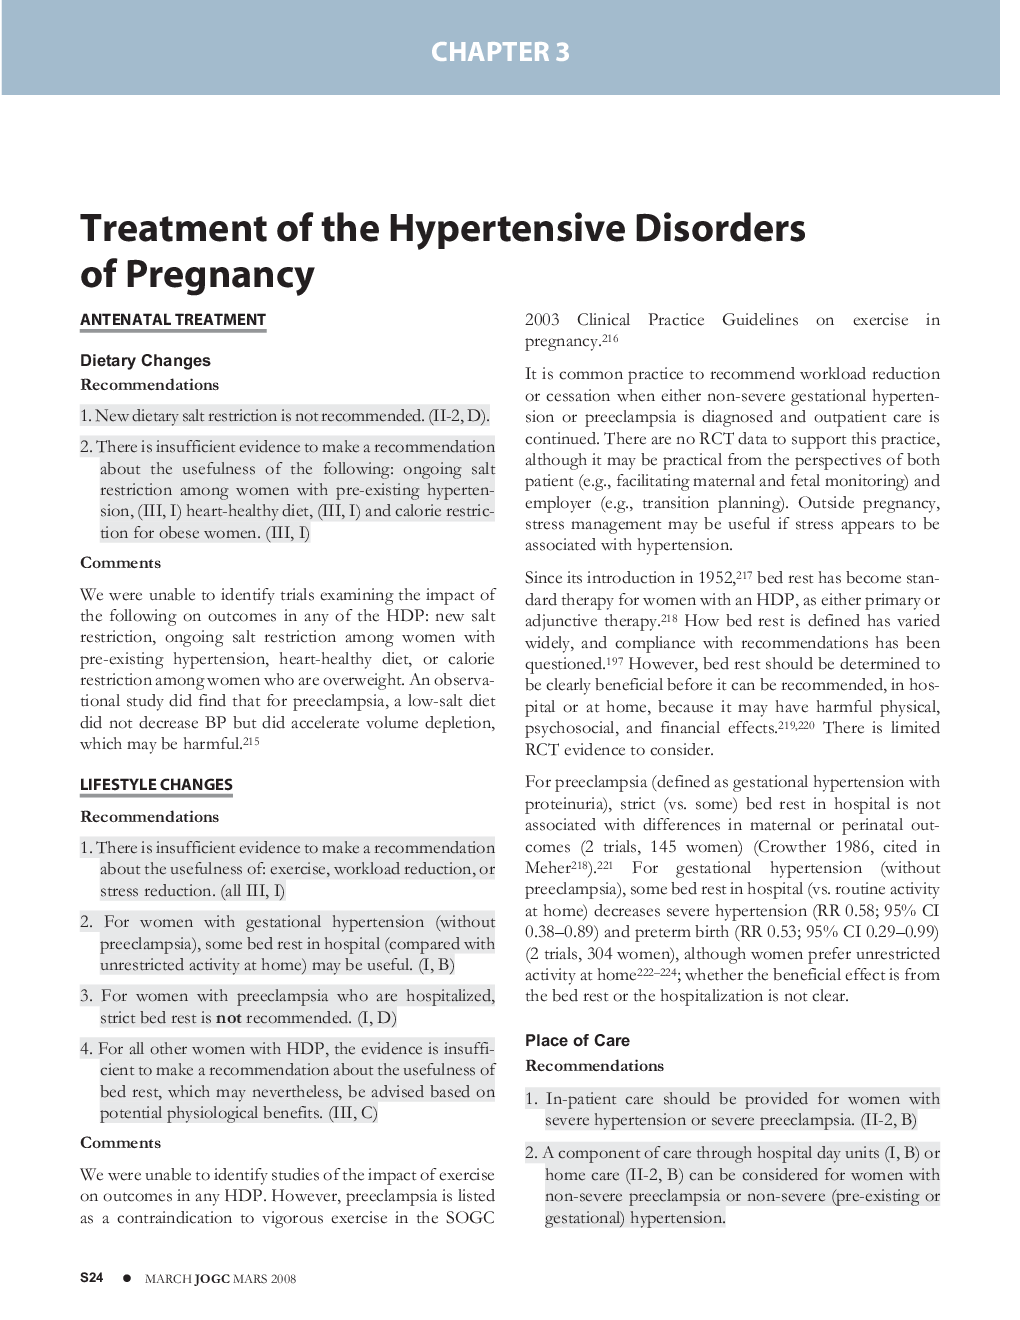 Treatment of the Hypertensive Disorders of Pregnancy